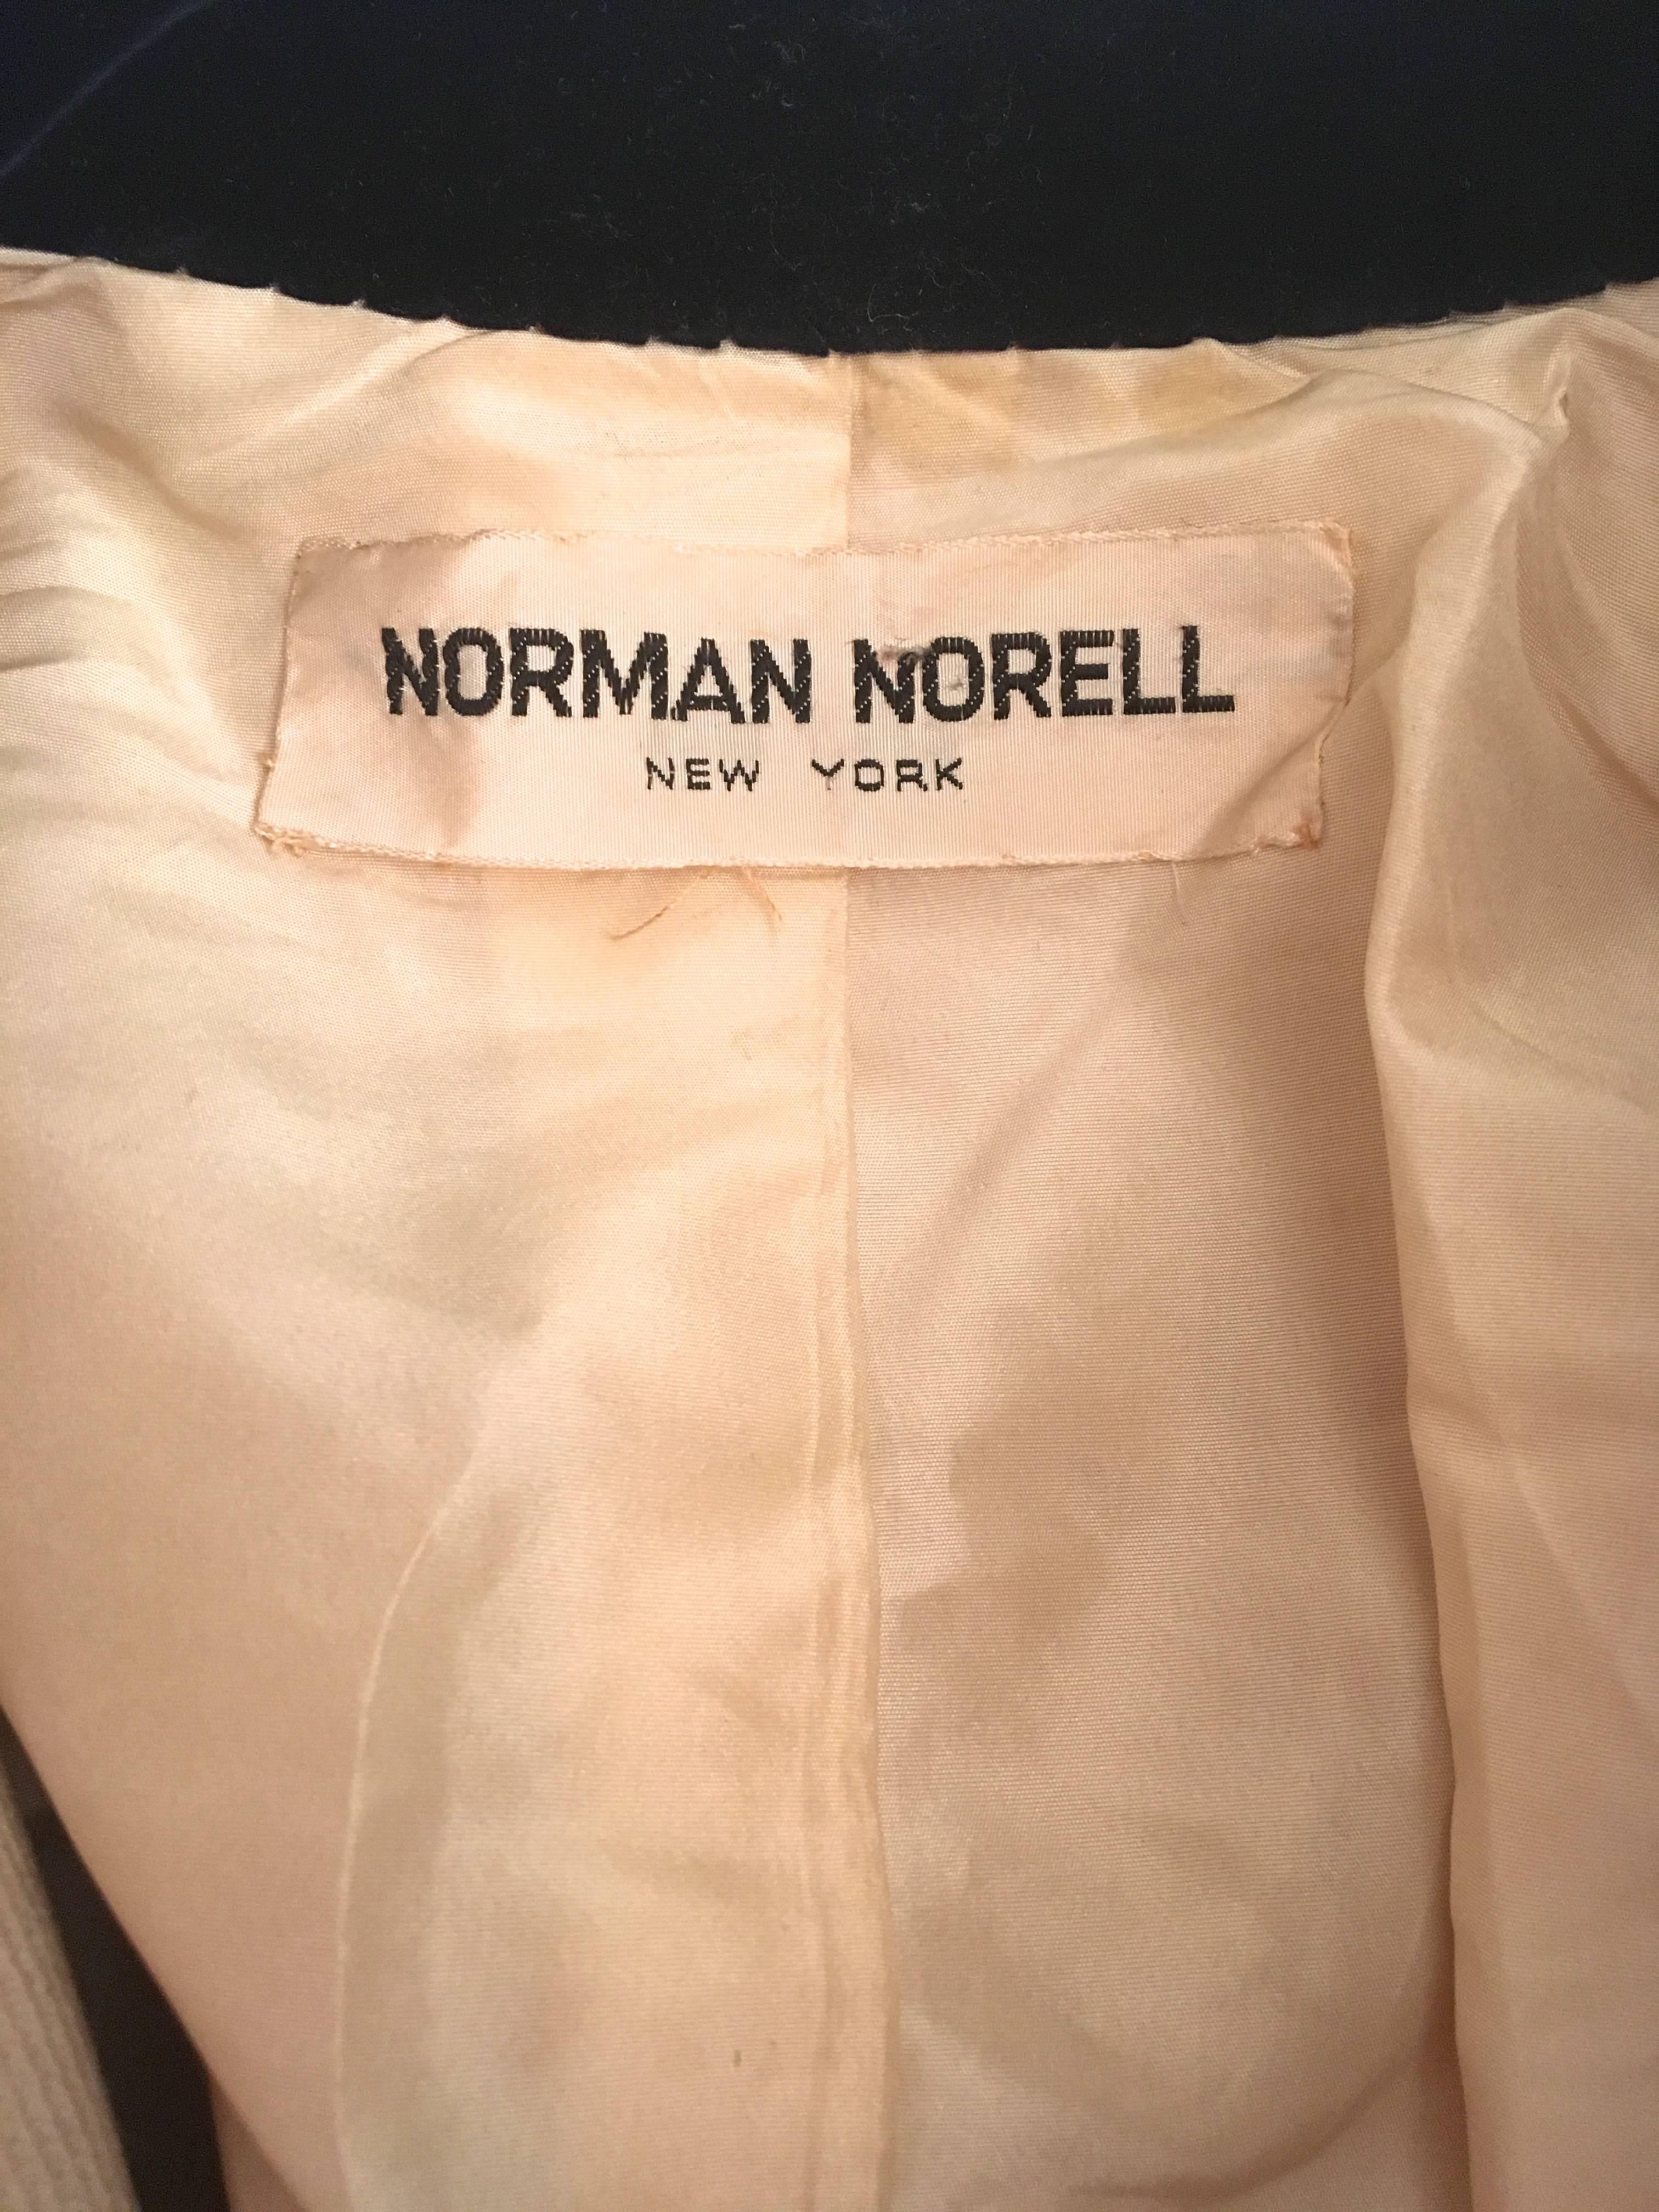 Norman Norell Beige and Dark Blue Coat - 1960's In Good Condition For Sale In Boca Raton, FL